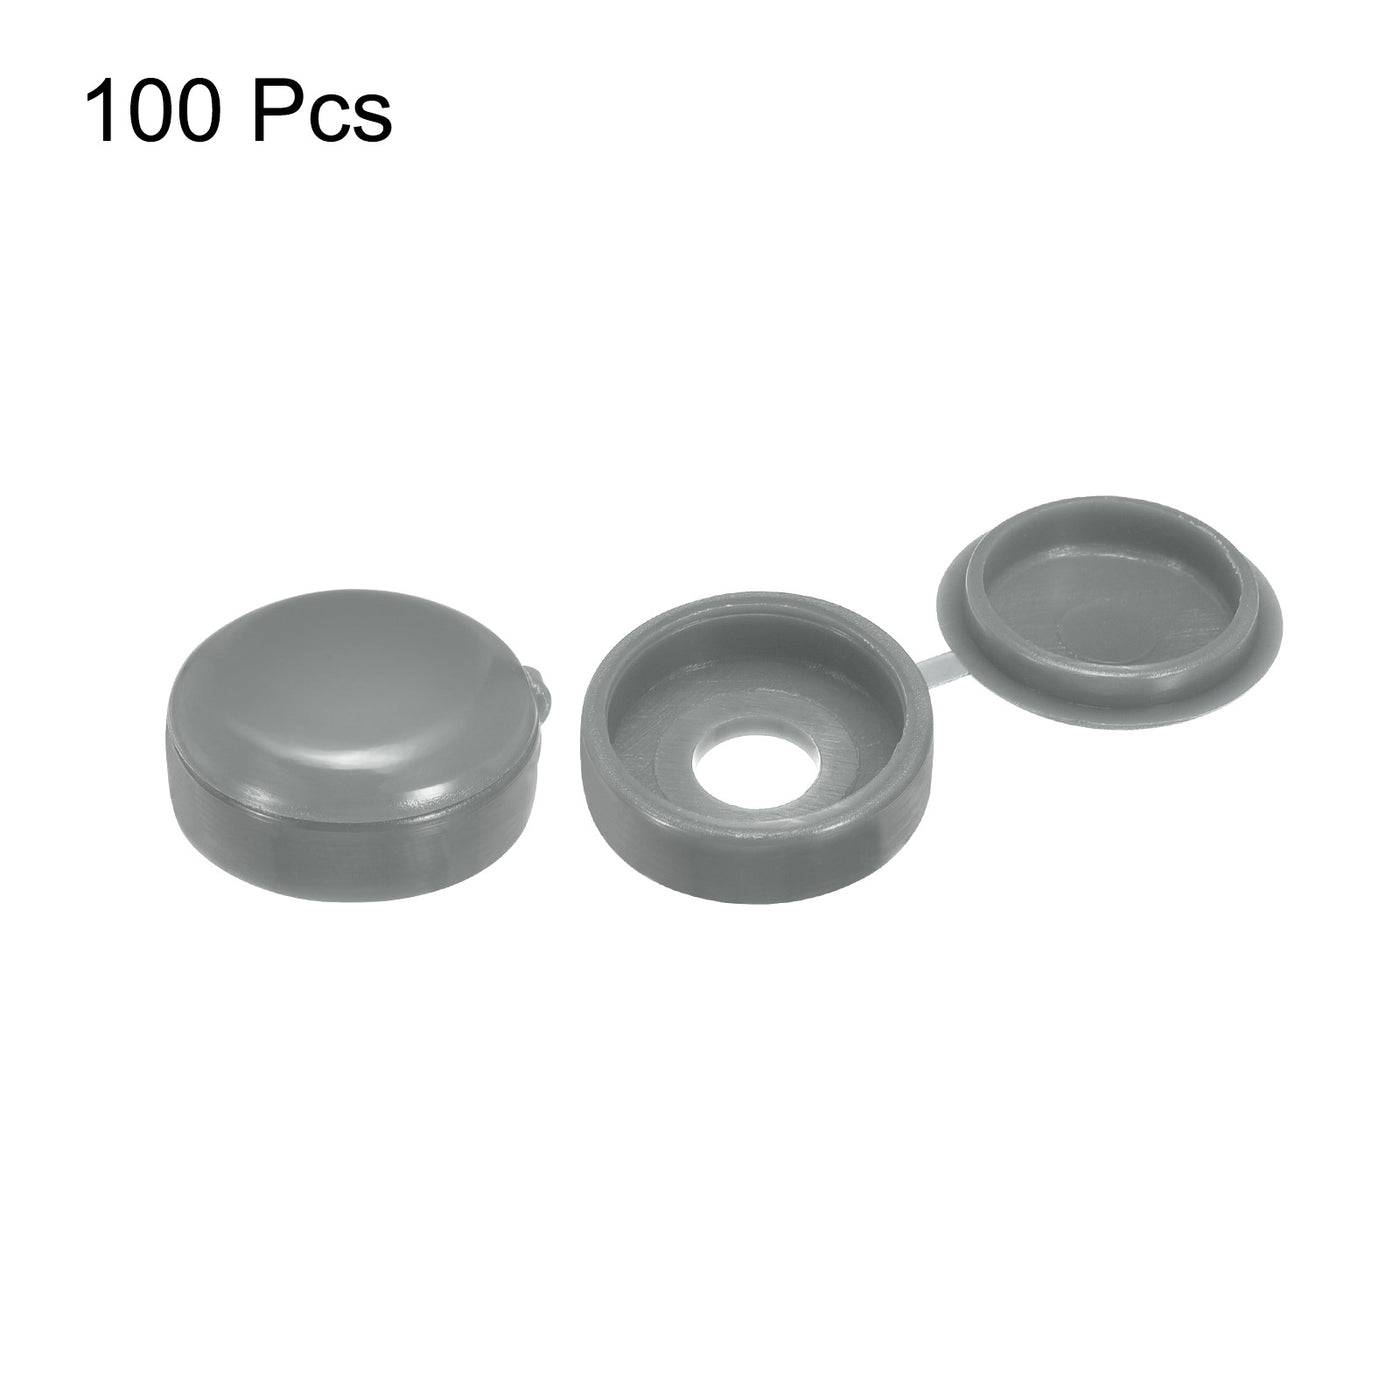 uxcell Uxcell 100Pcs 5mm Hinged Screw Cover Caps Plastic Fold Screw Snap Covers, Gray